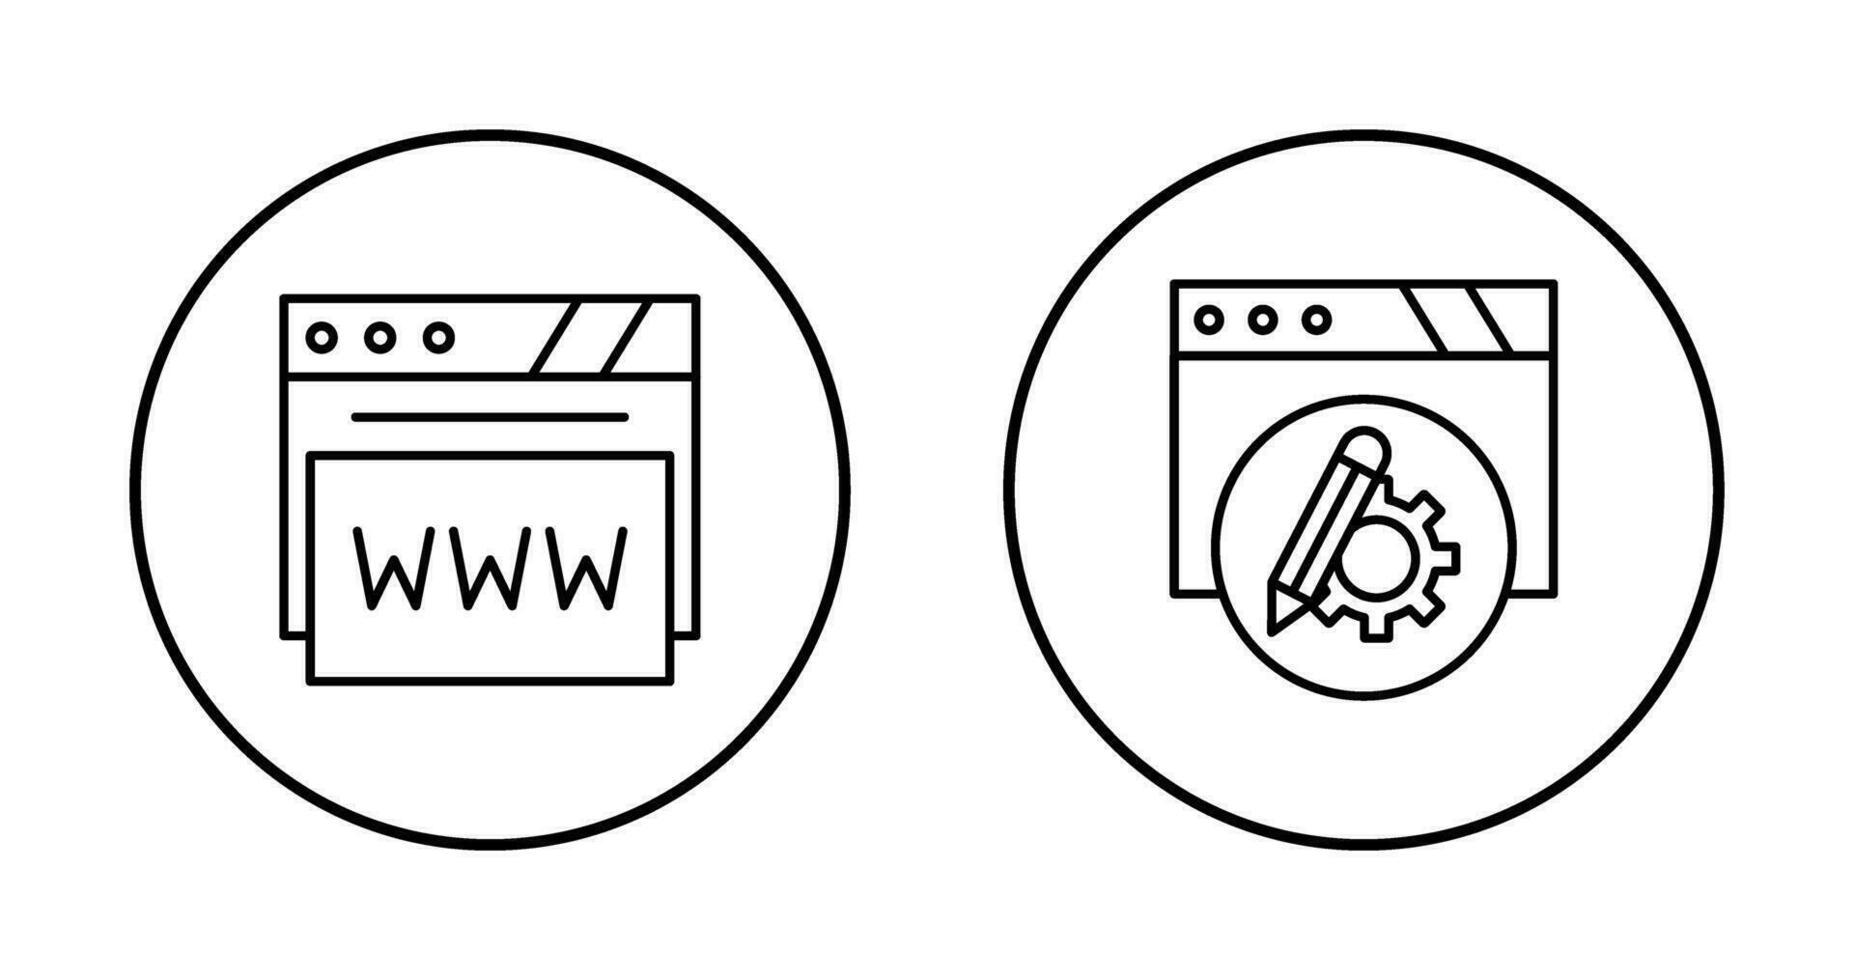 Setting and Web Browser Icon vector